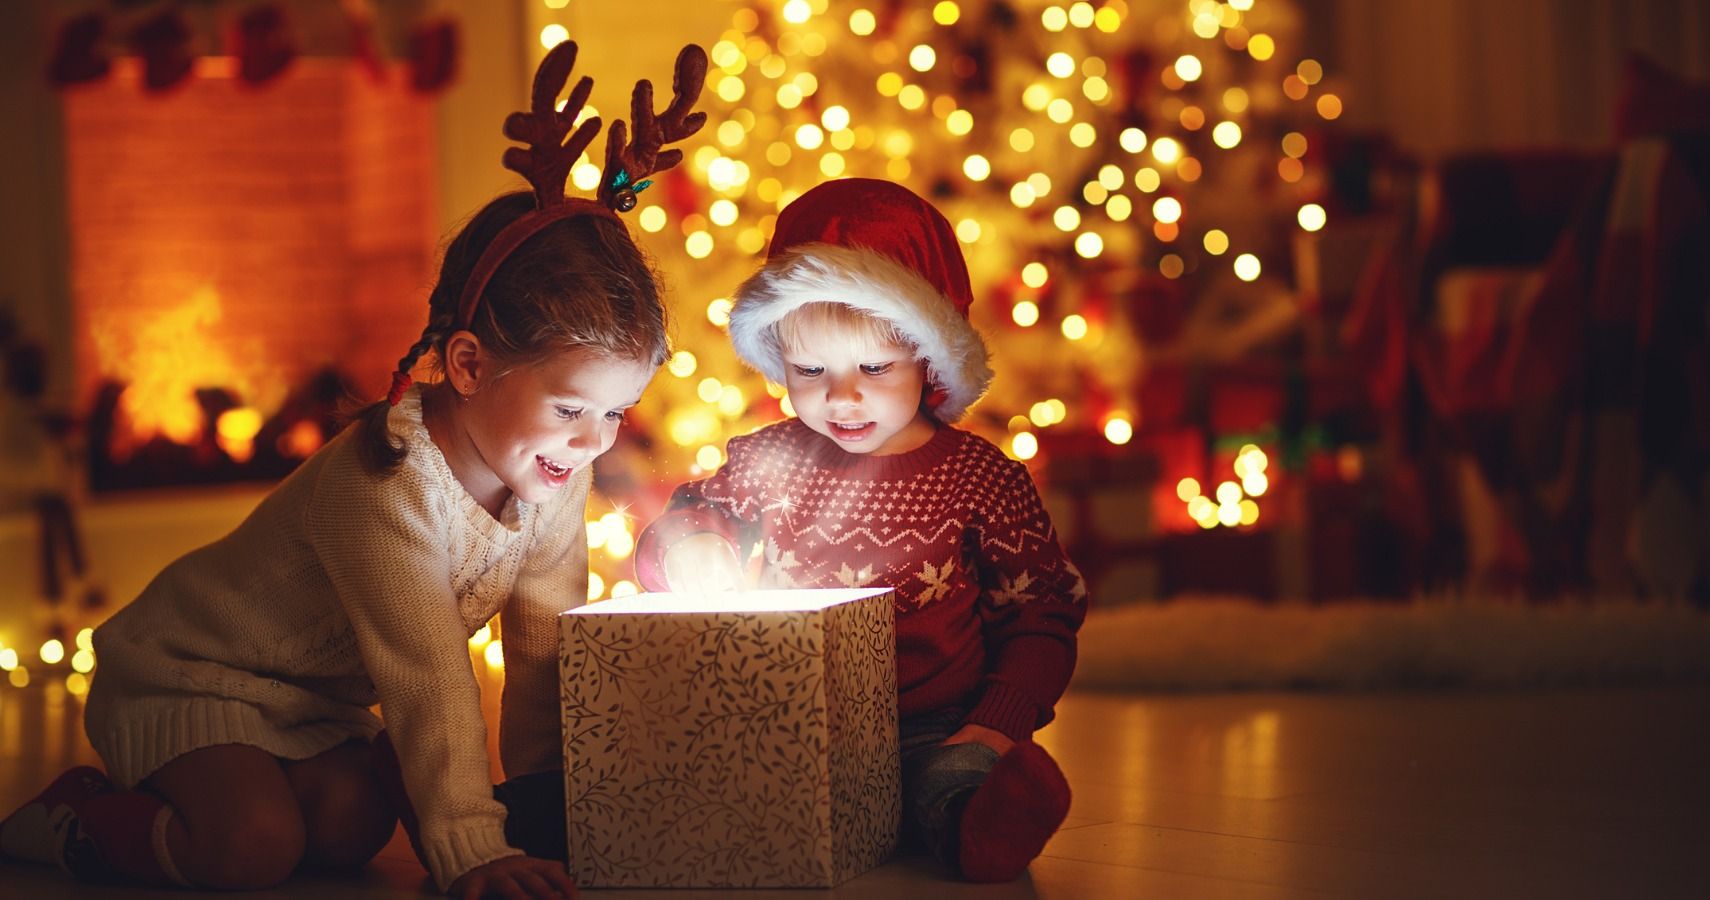 Ungrateful Kids? Here's The Secret To A Happy Christmas